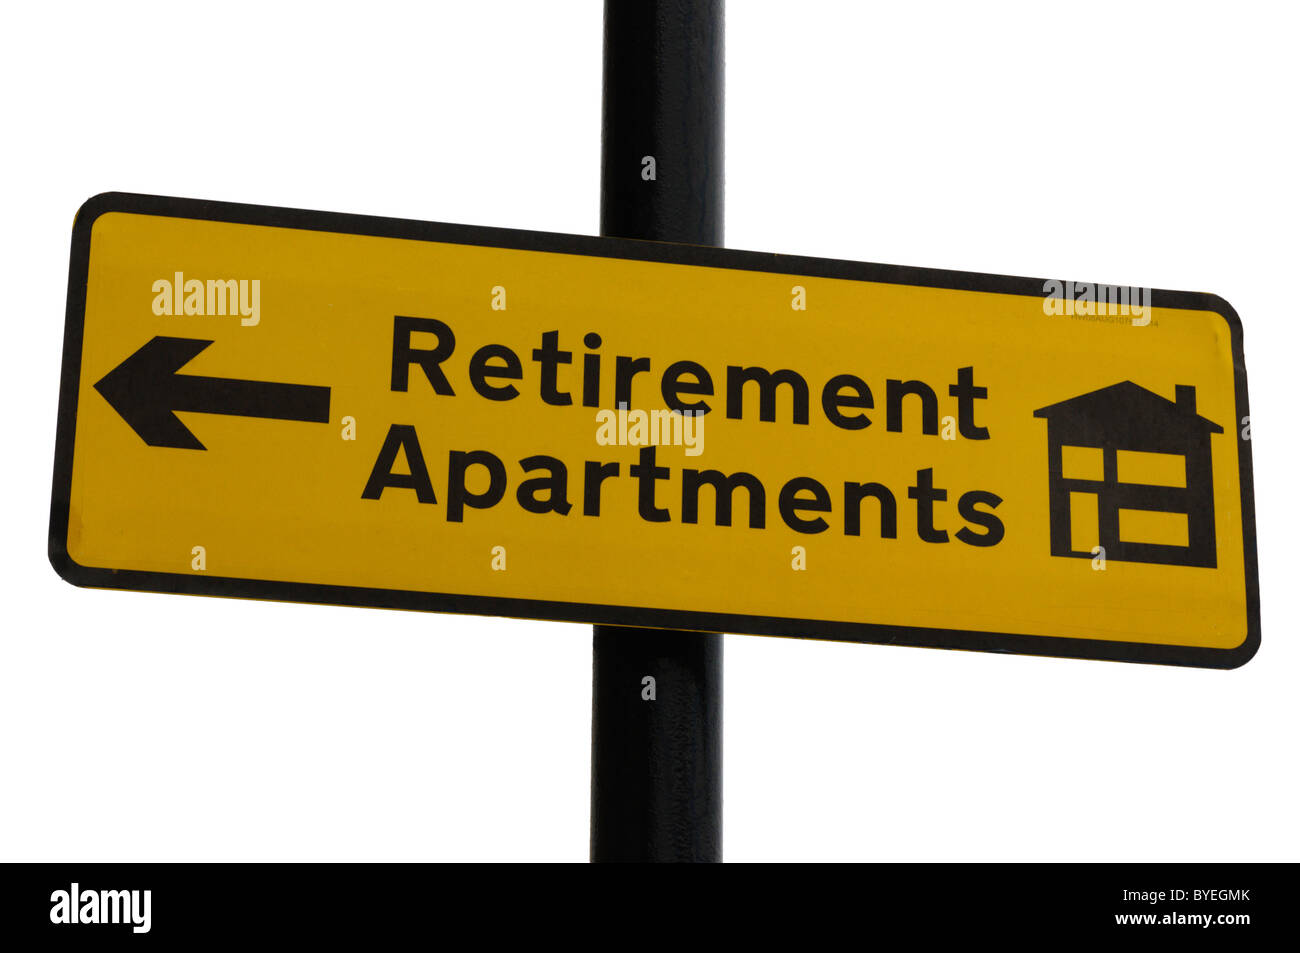 A sign pointing to new Retirement Apartments.  See Image Ref BRJPH4 for right-pointing arrow. Stock Photo